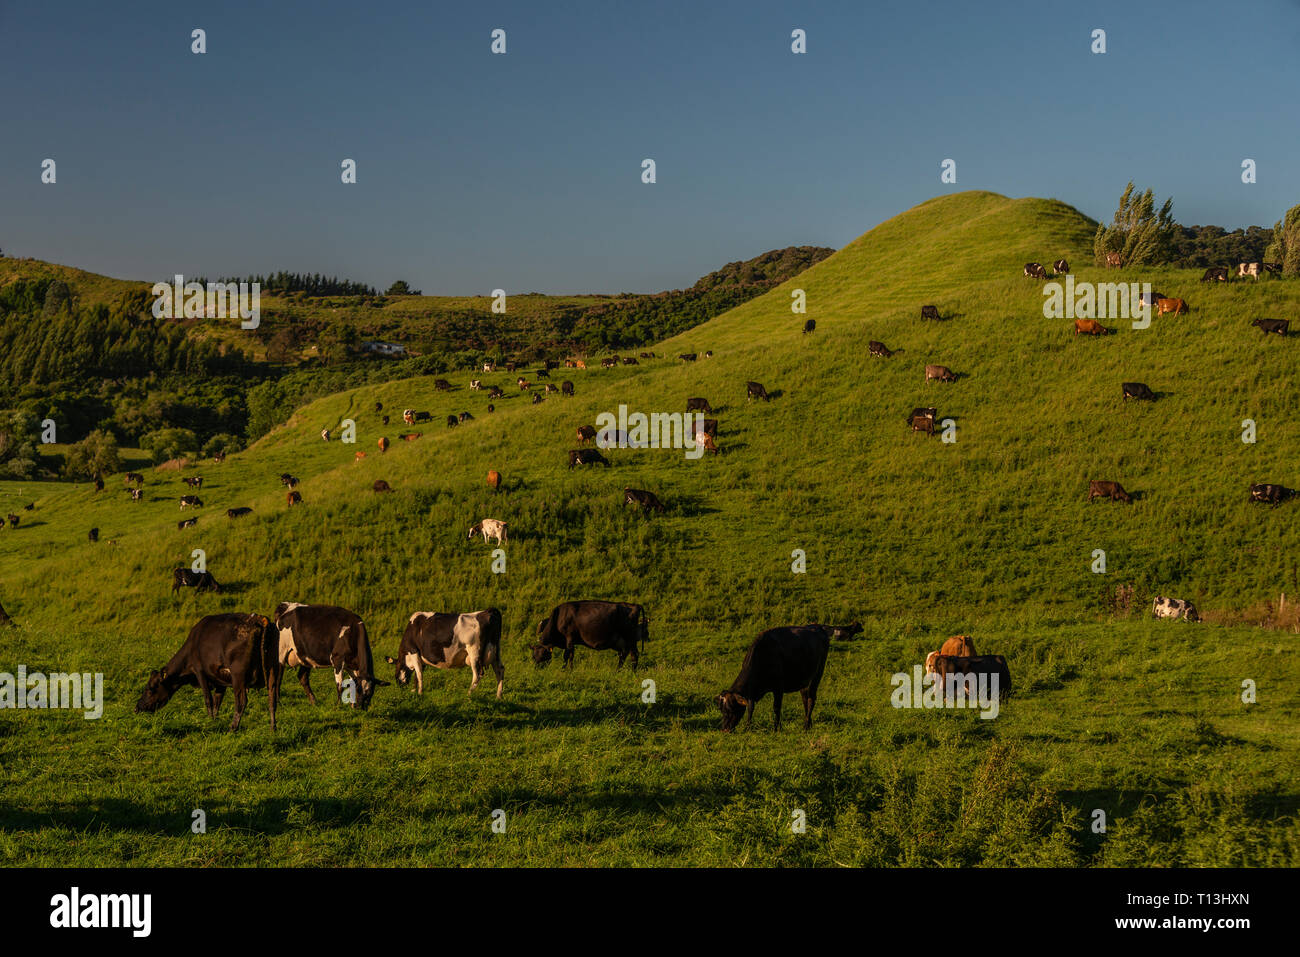 Cattle grazing in a typical rural New Zealand landscape. The rolling silt hills are possible evidence of ancient flooding. Stock Photo